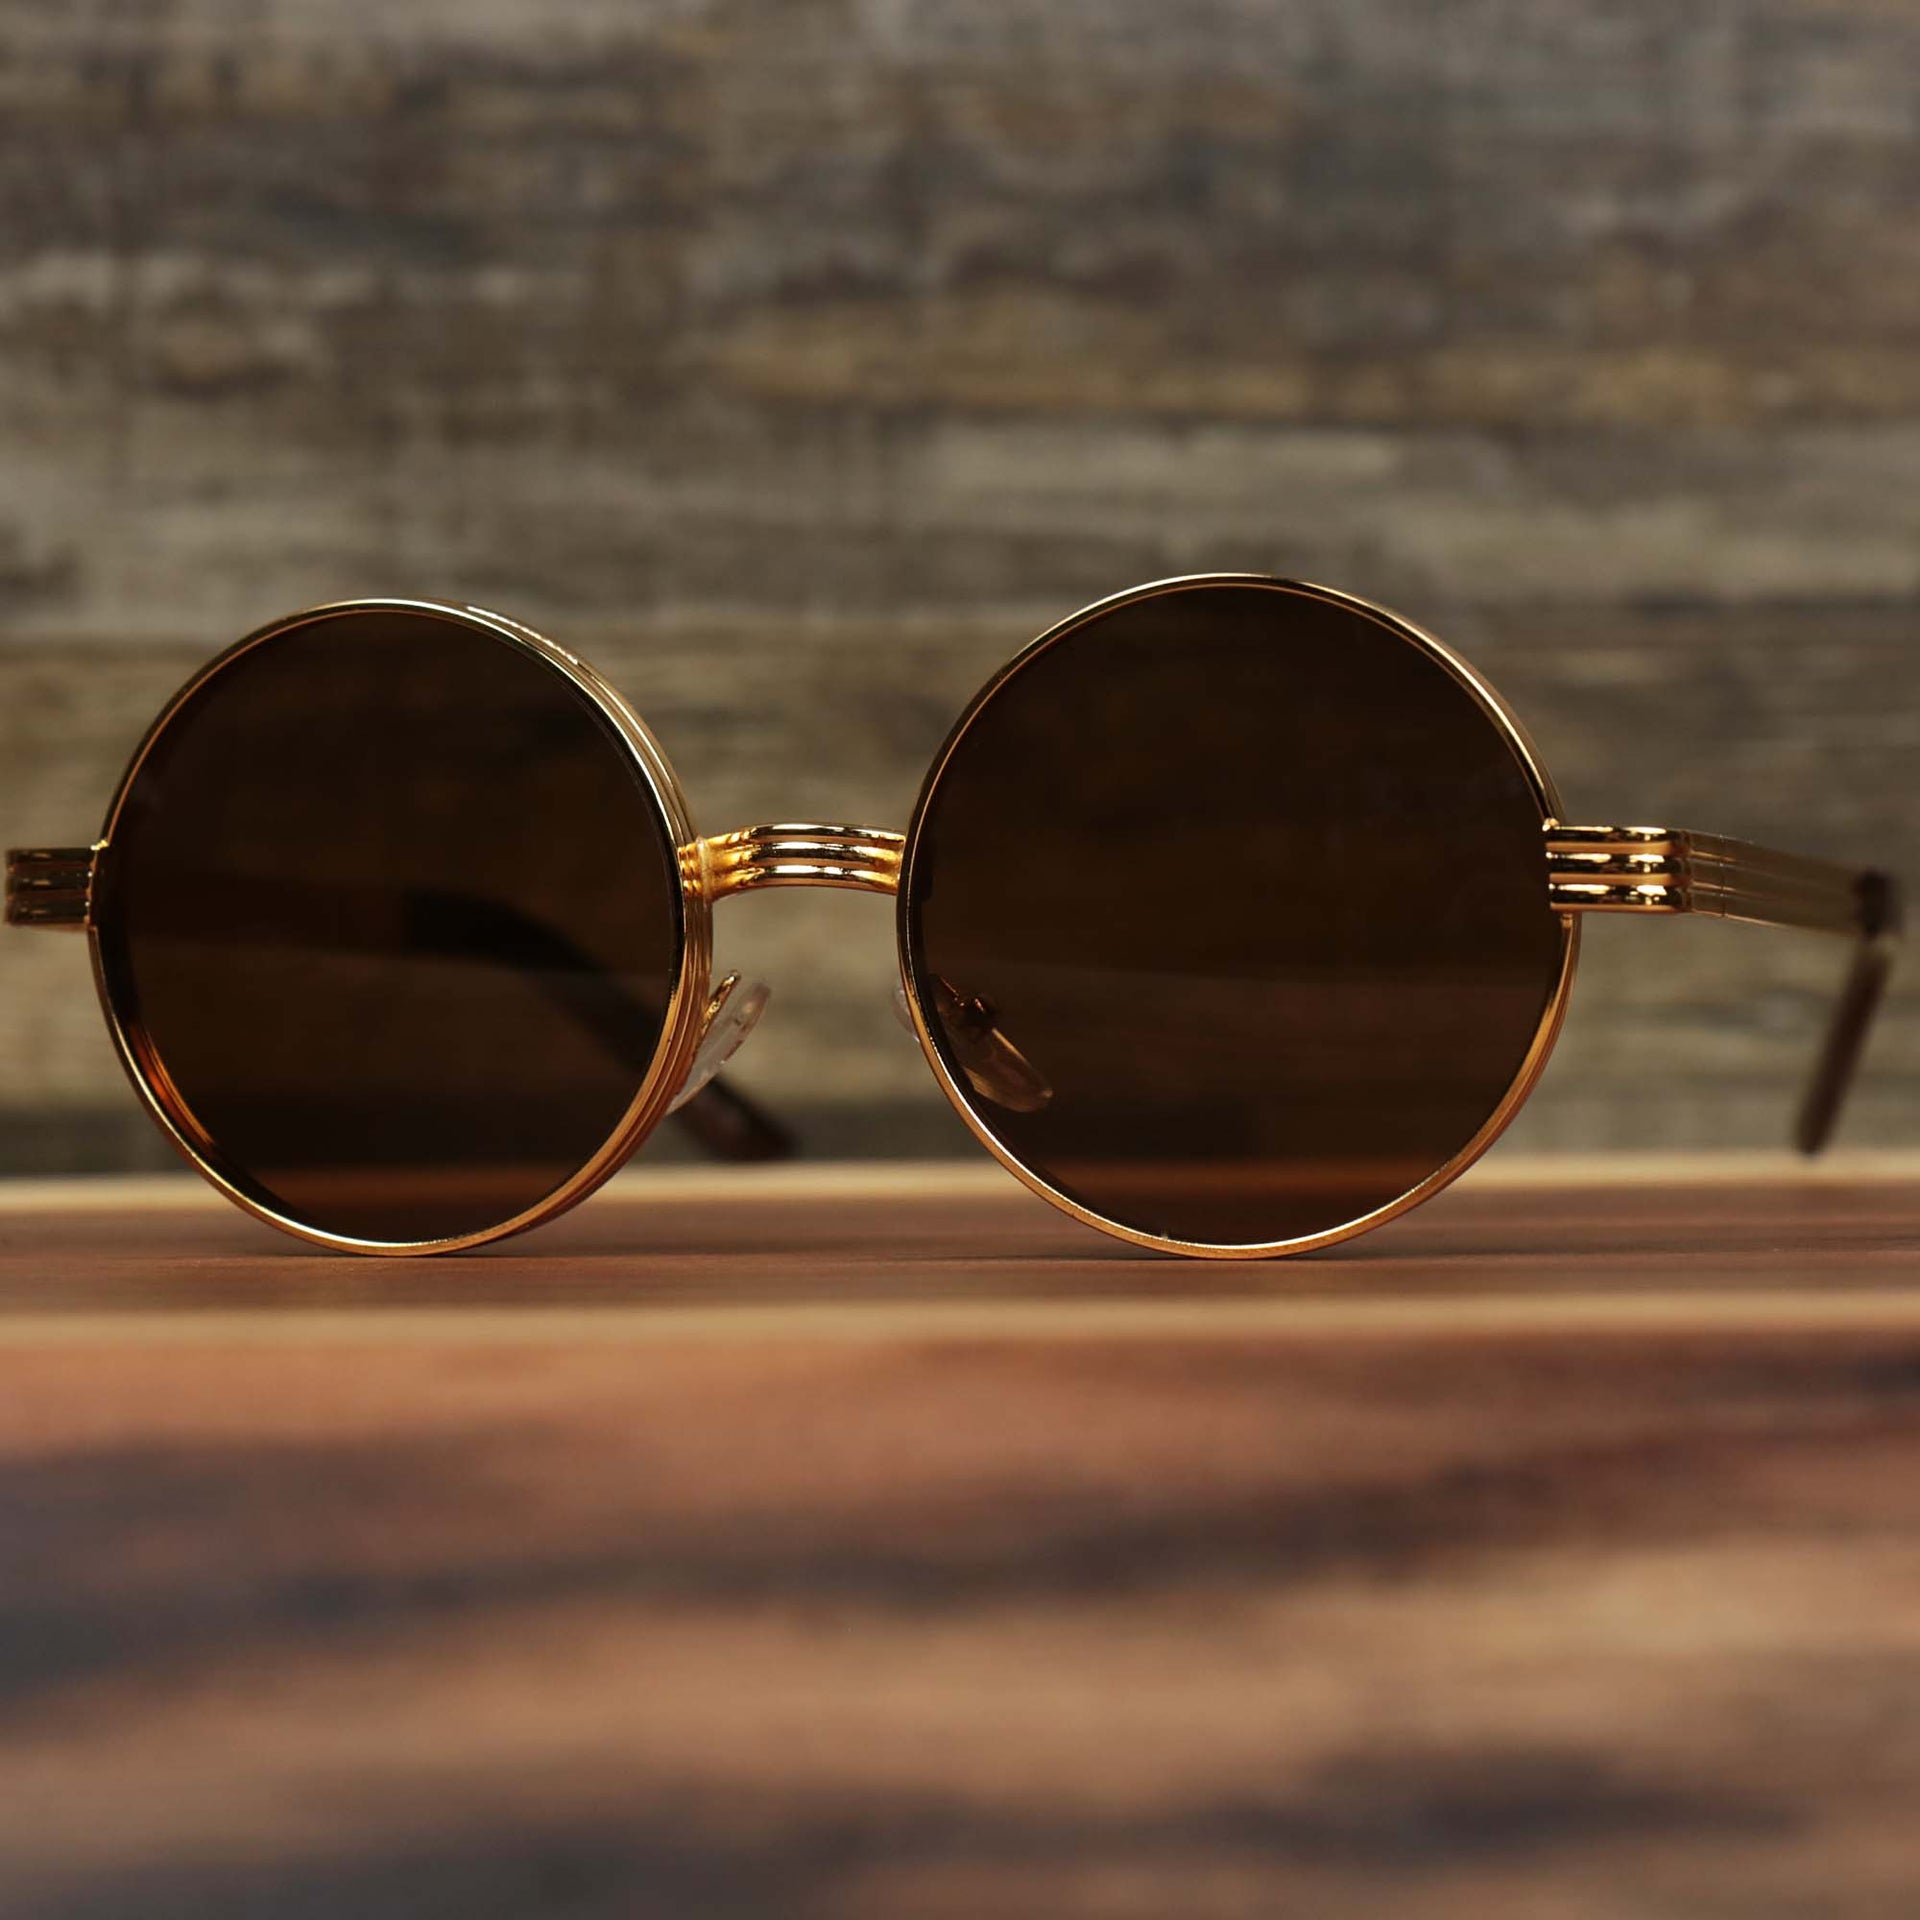 The Round 3 Row Frame Brown Lens Sunglasses with Gold Frame